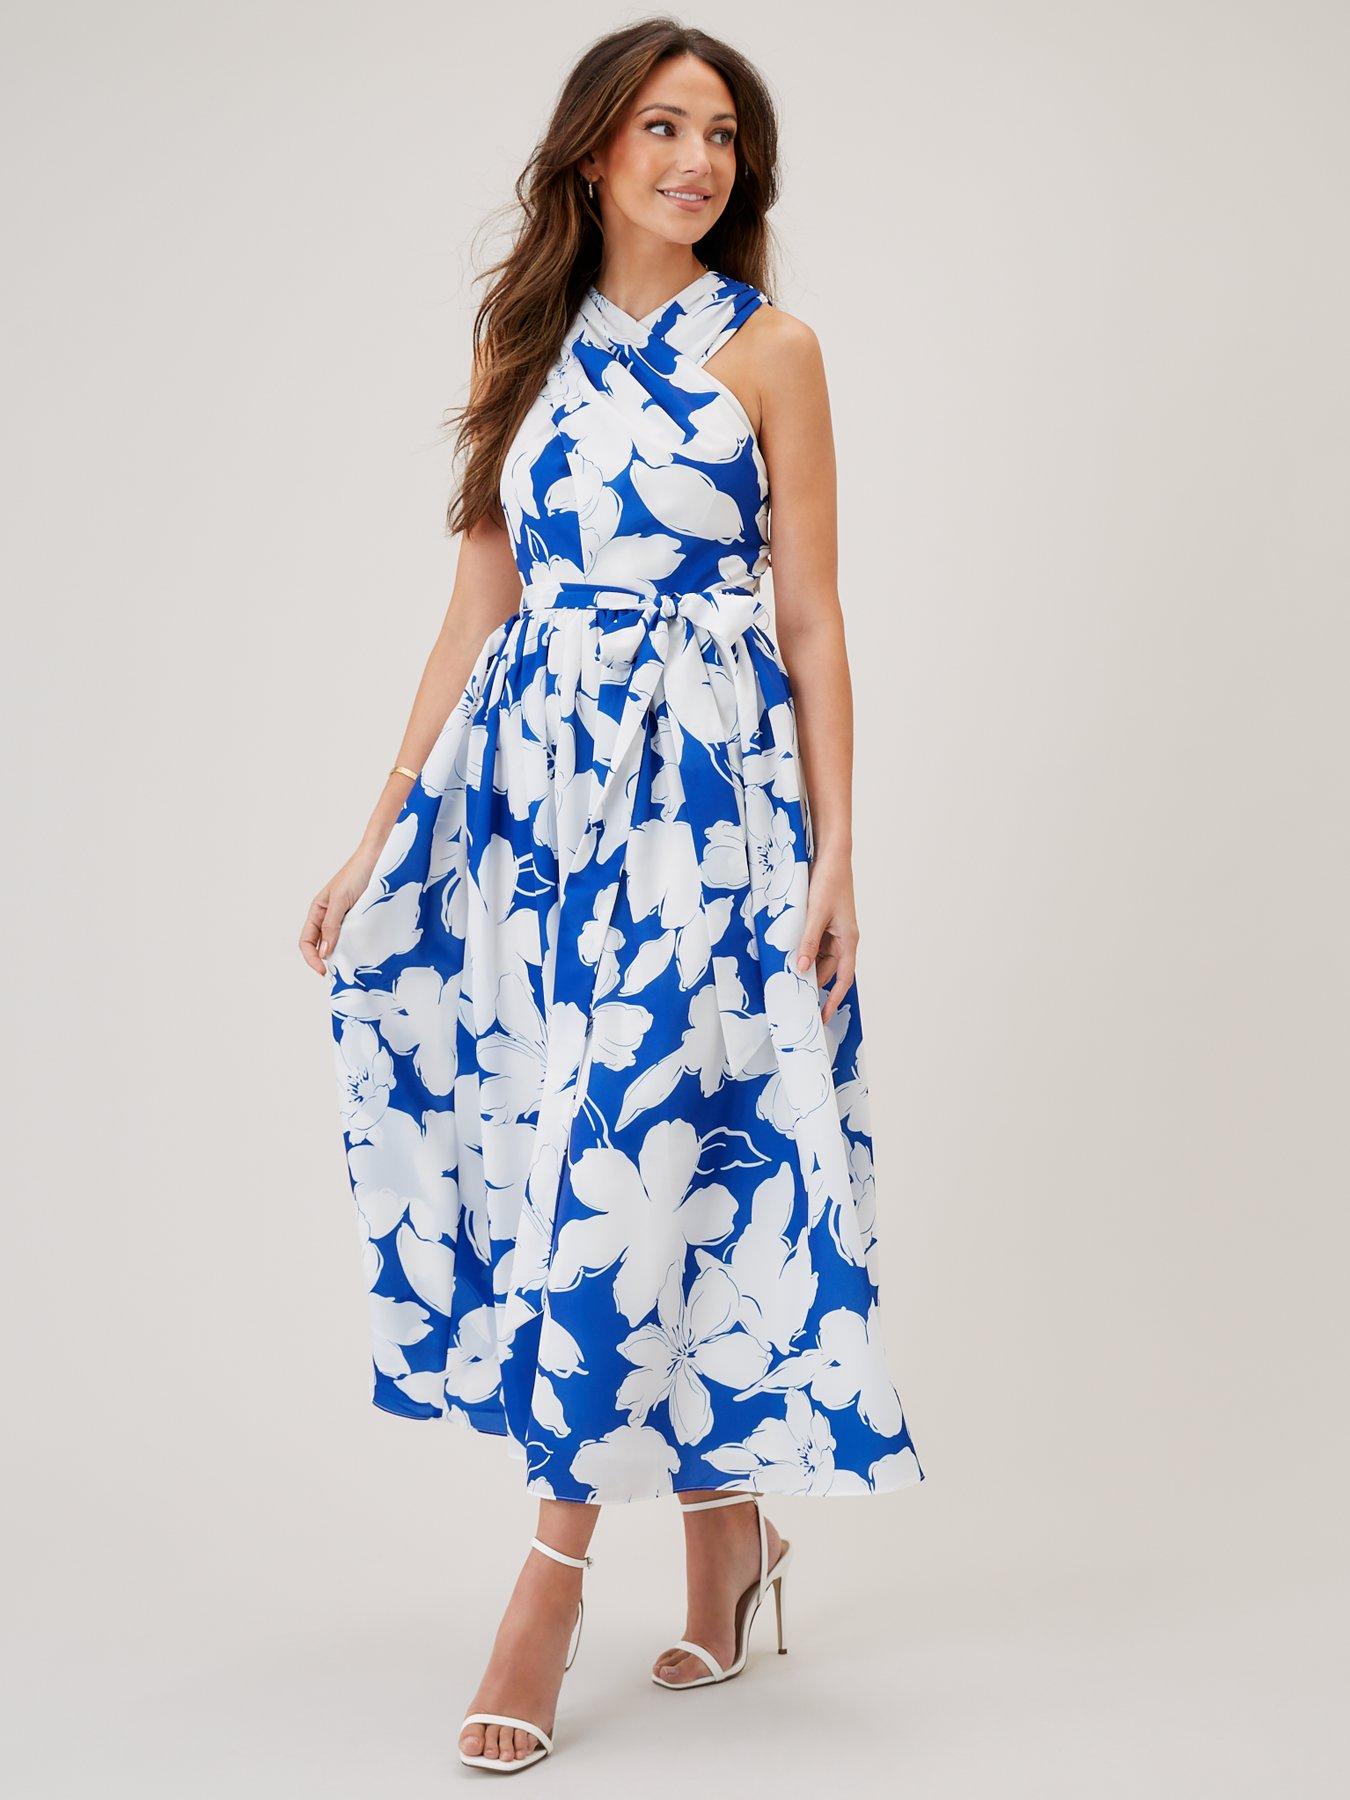 blue midi dress for party